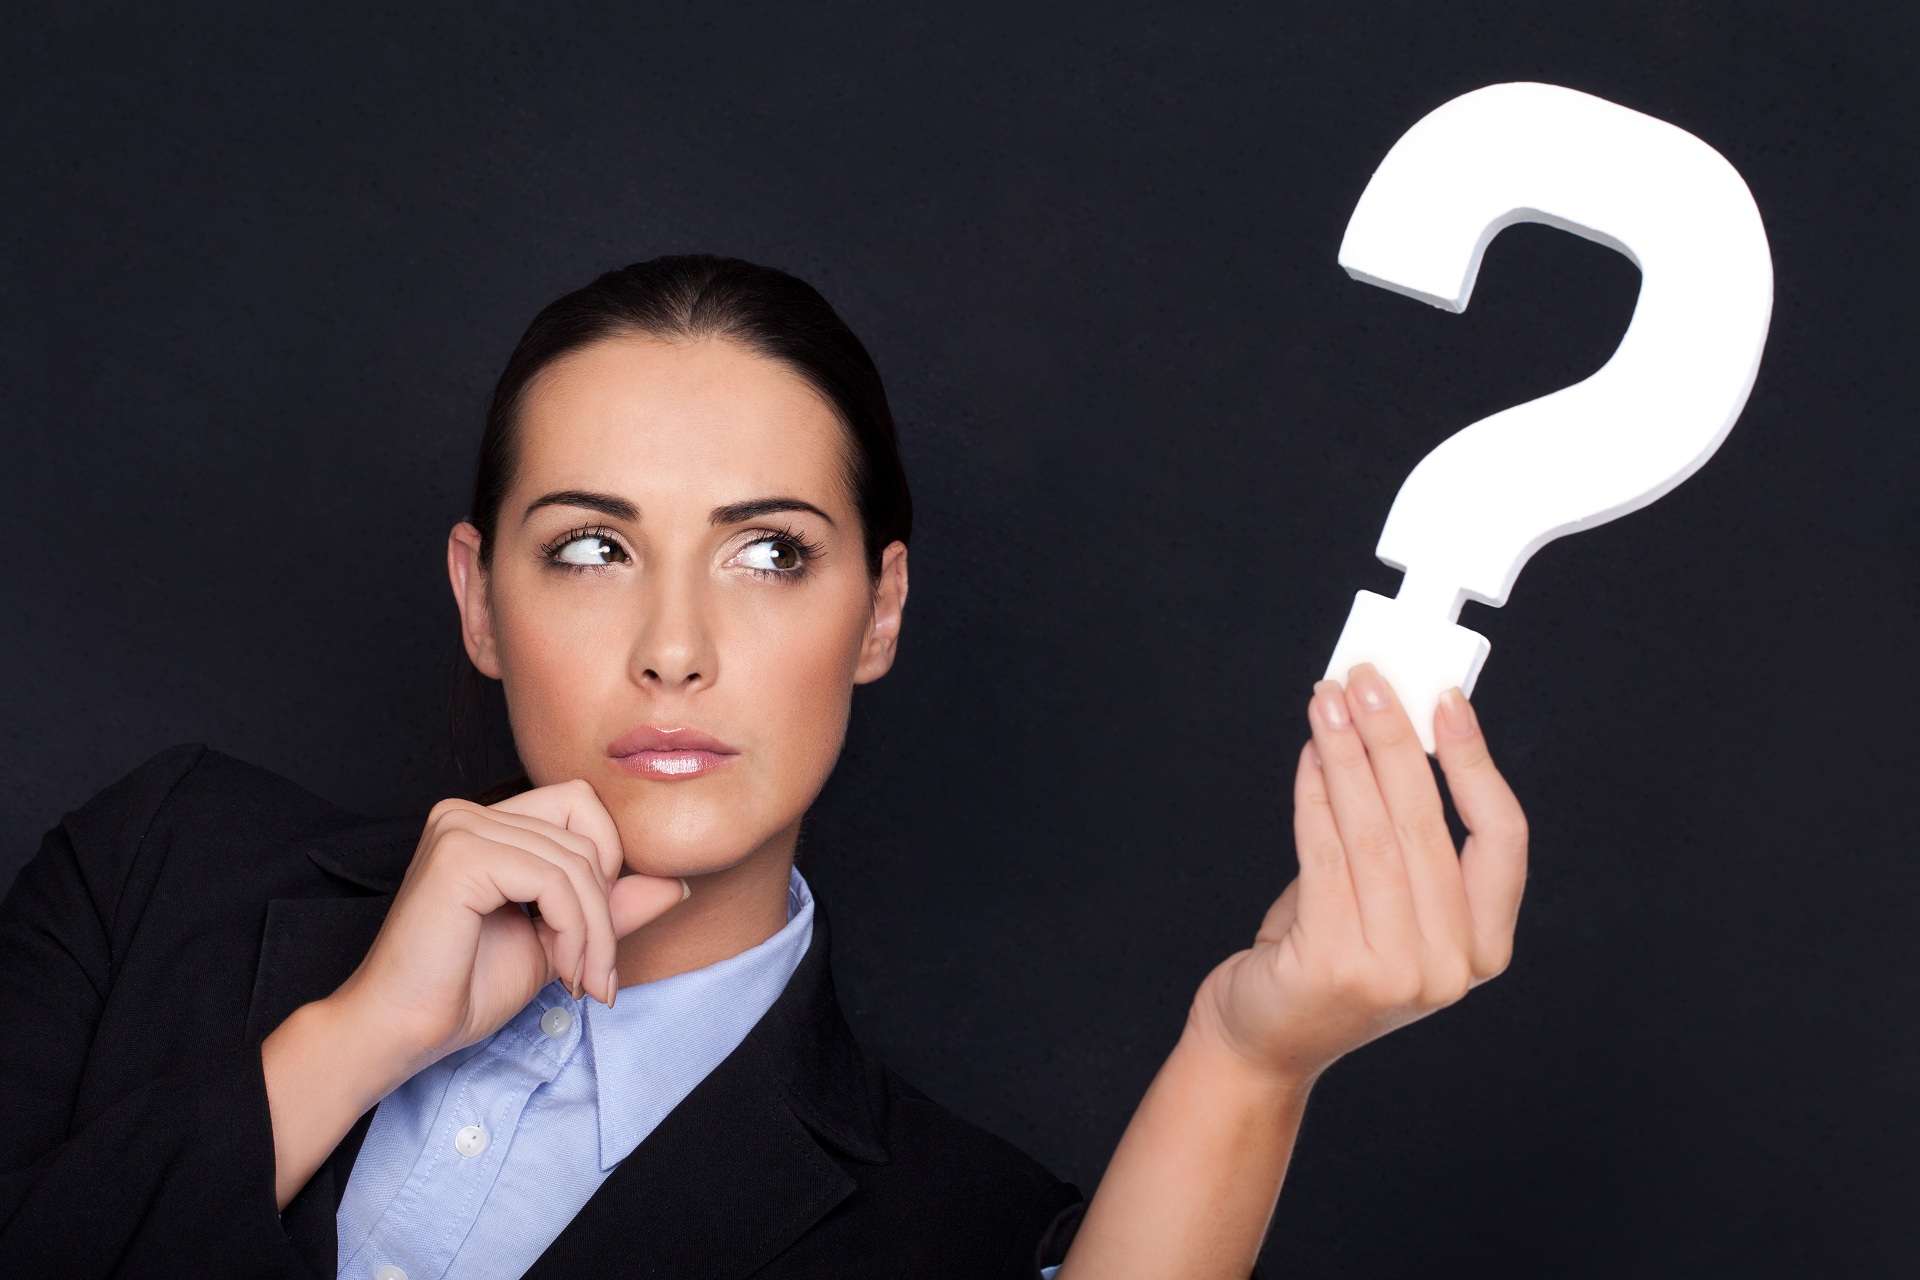 6 Questions to Ask Vocational Experts